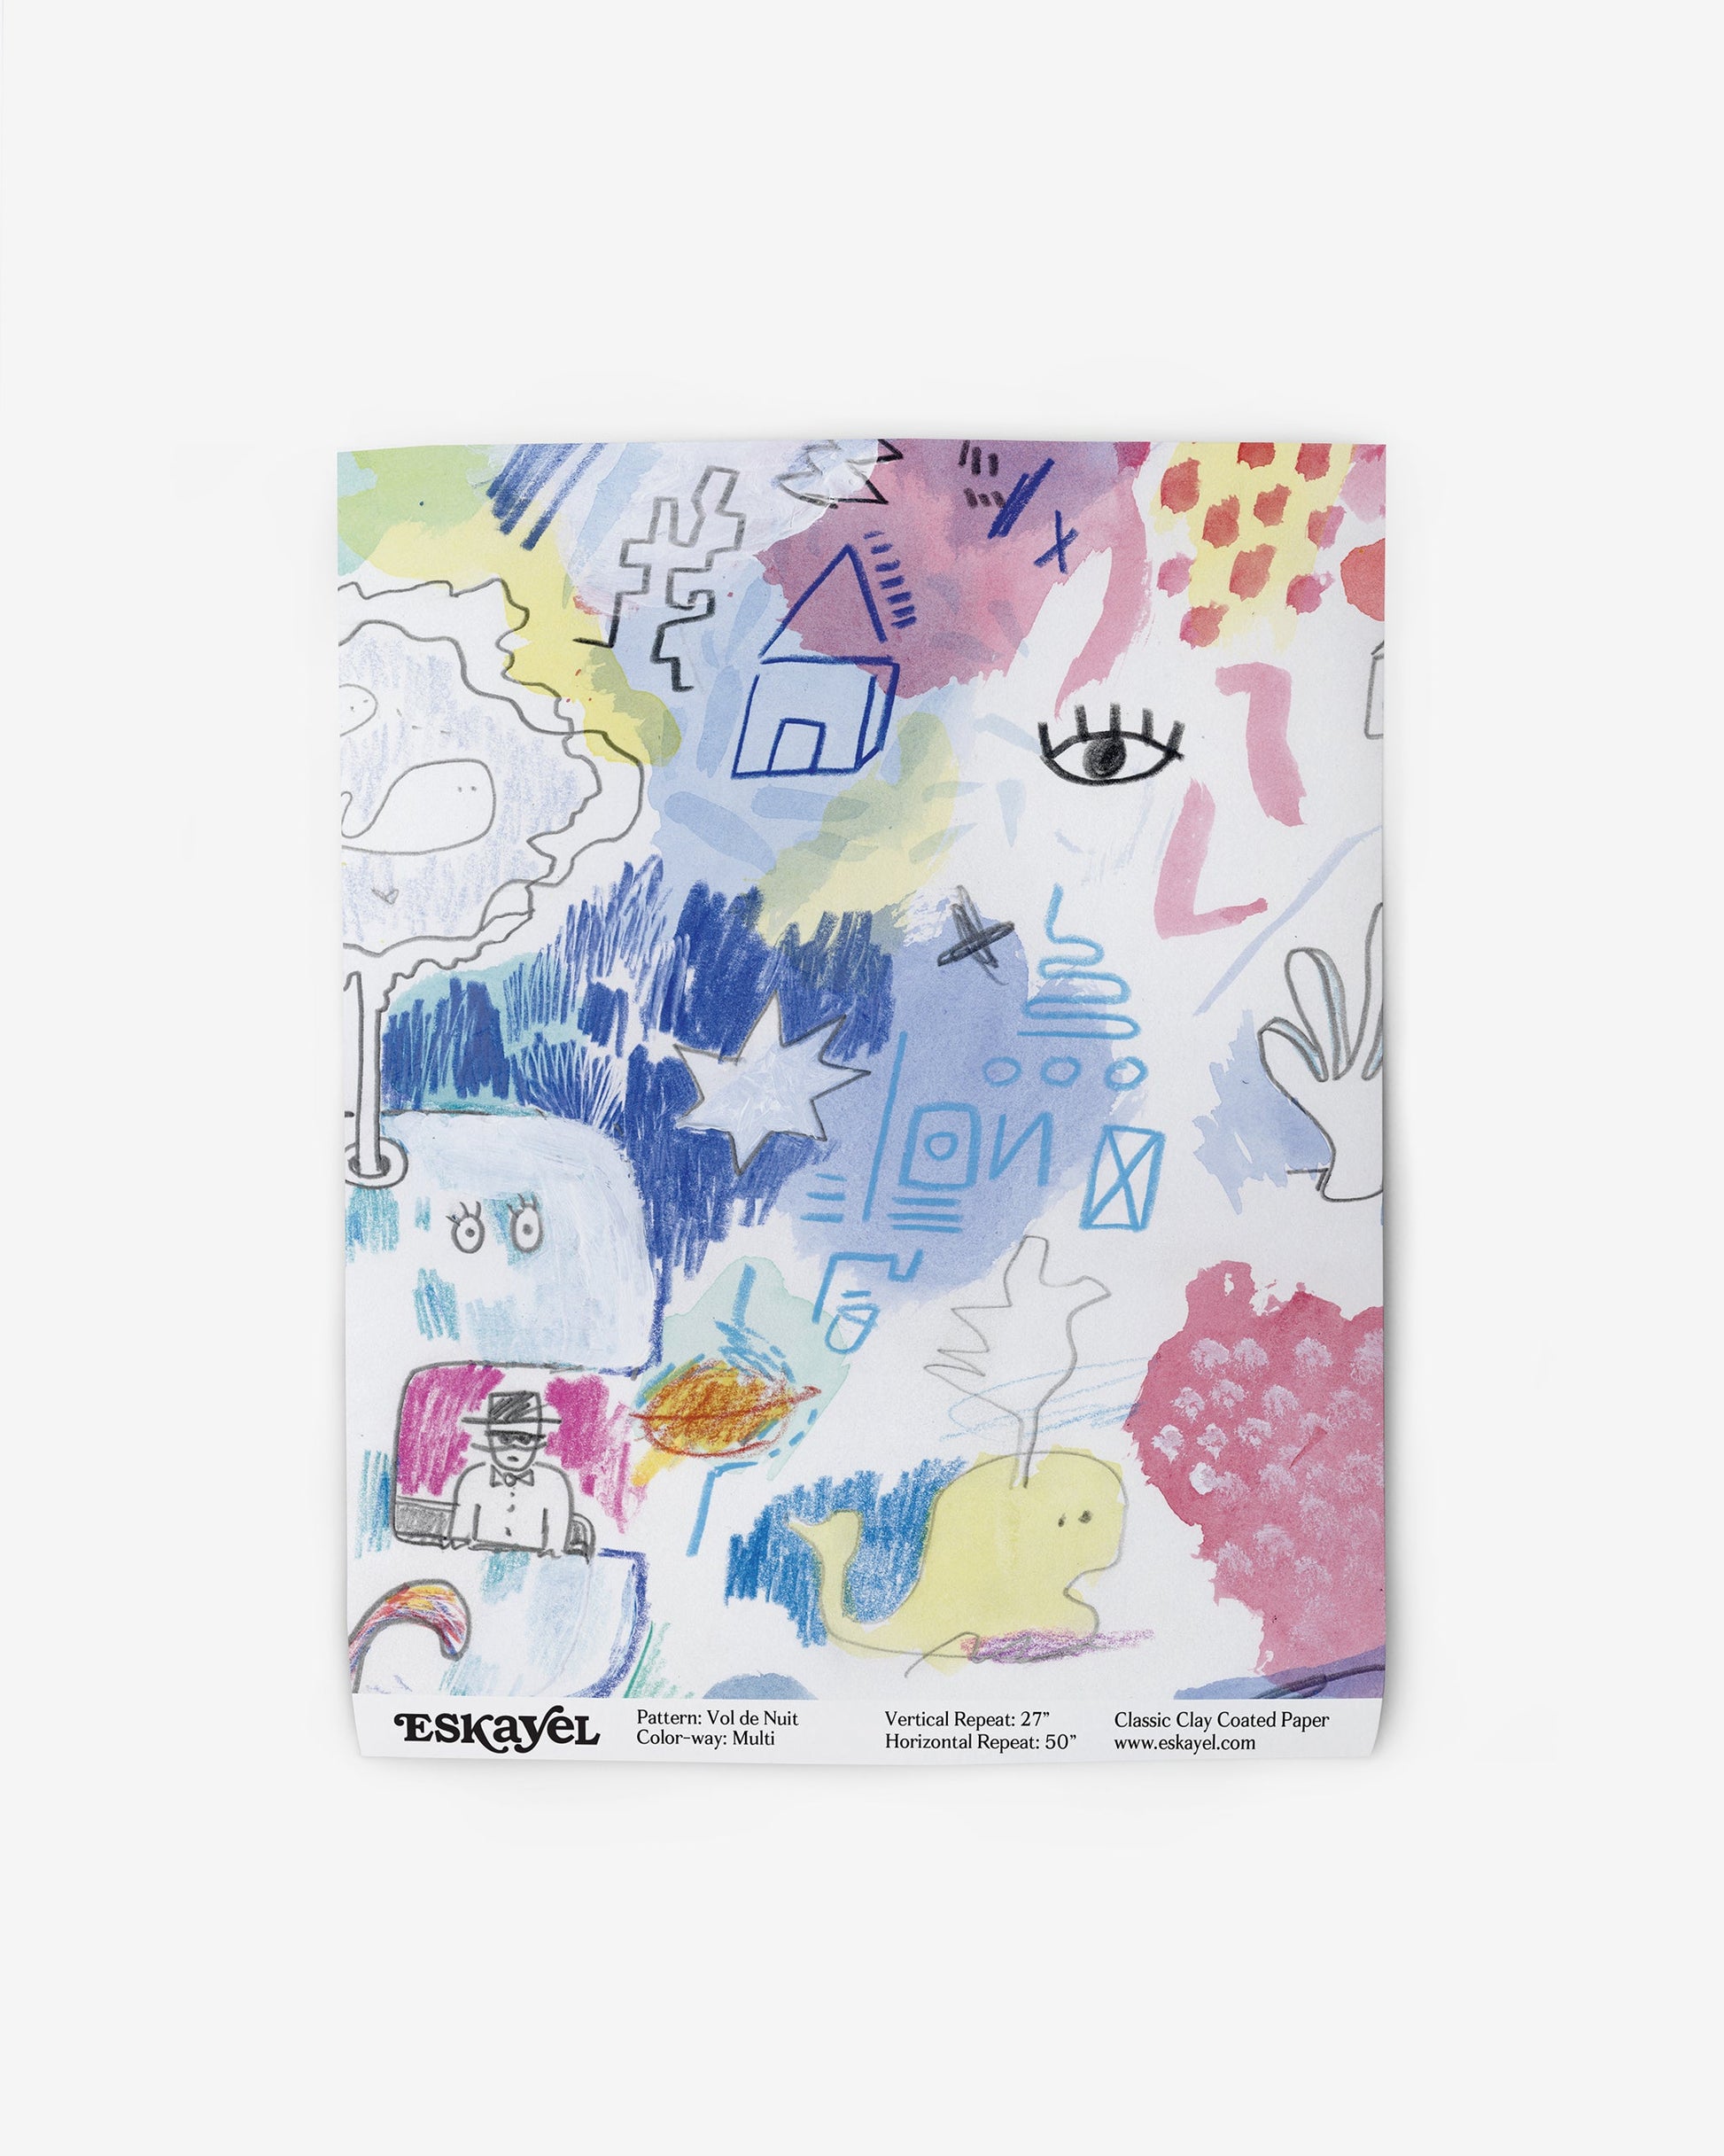 A colorful Vol de Nuit Wallpaper Multi with a drawing of a rainbow by Eskayel